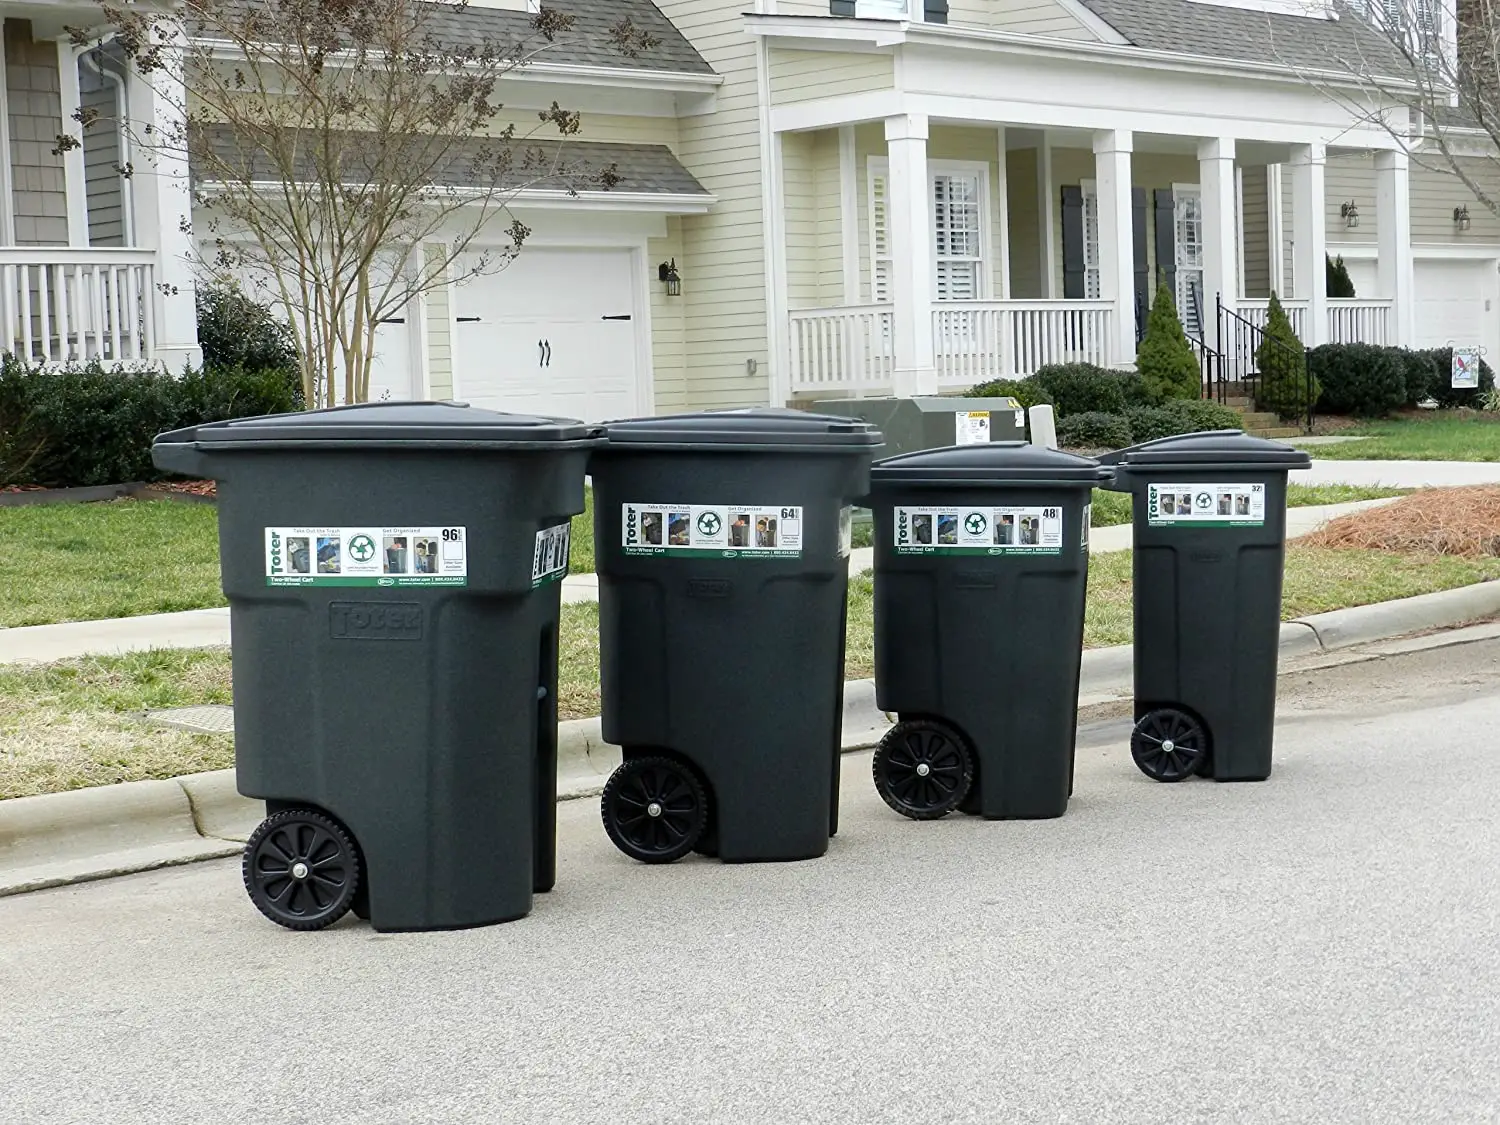 best outdoor garbage cans with locking lids and wheels